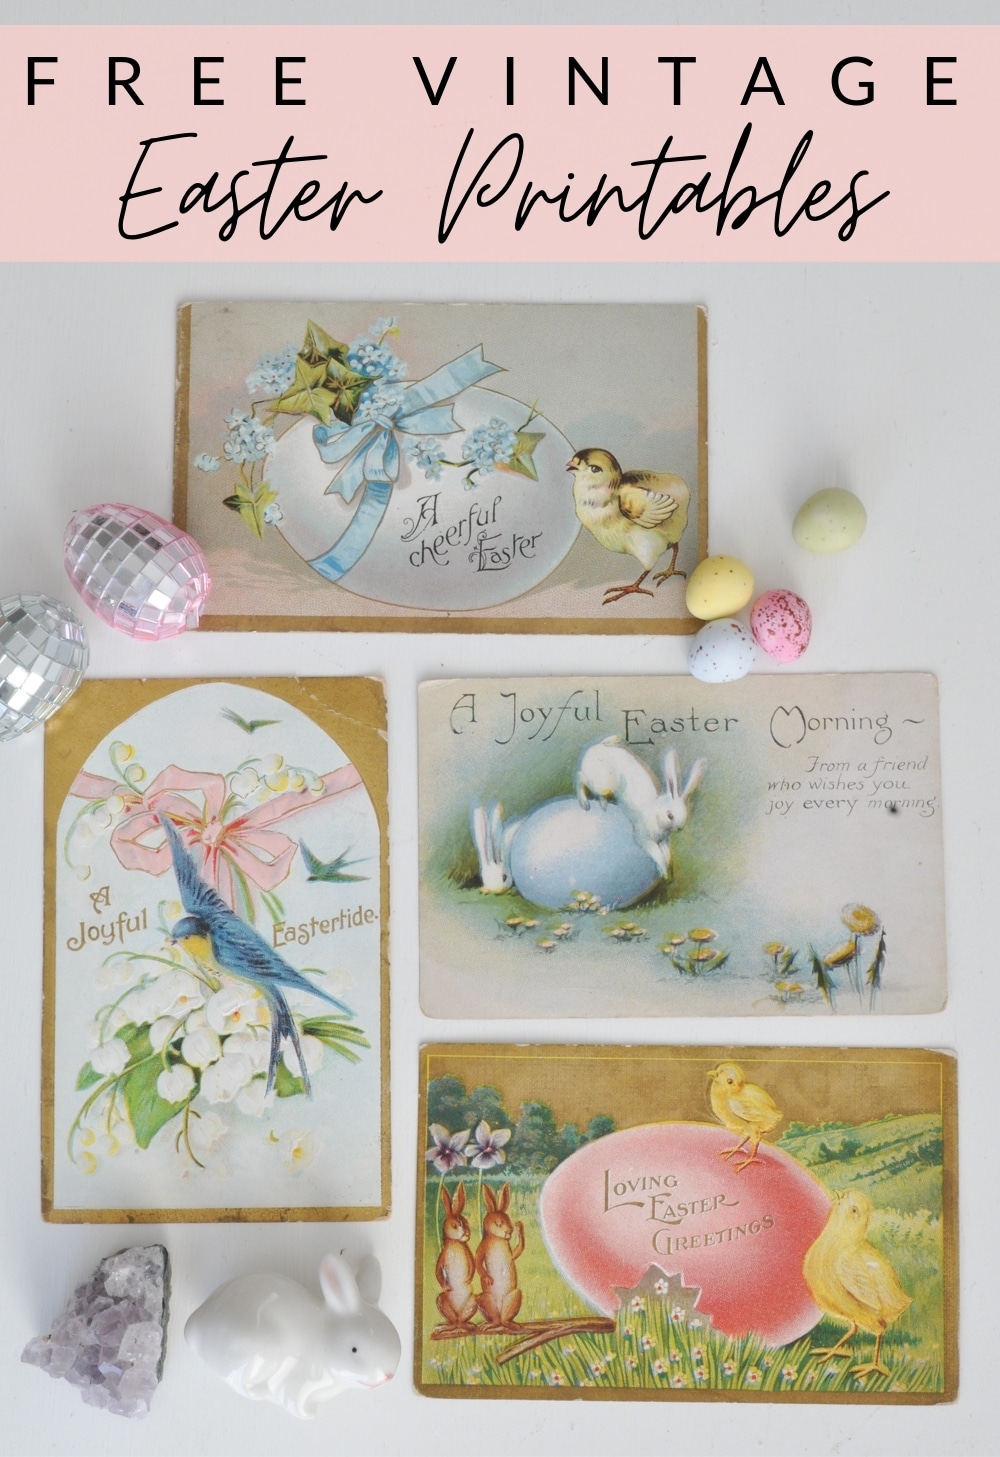 Free Vintage Easter Printables: these antique Easter postcards are available as a free download, to print and enjoy for decor, and crafting.